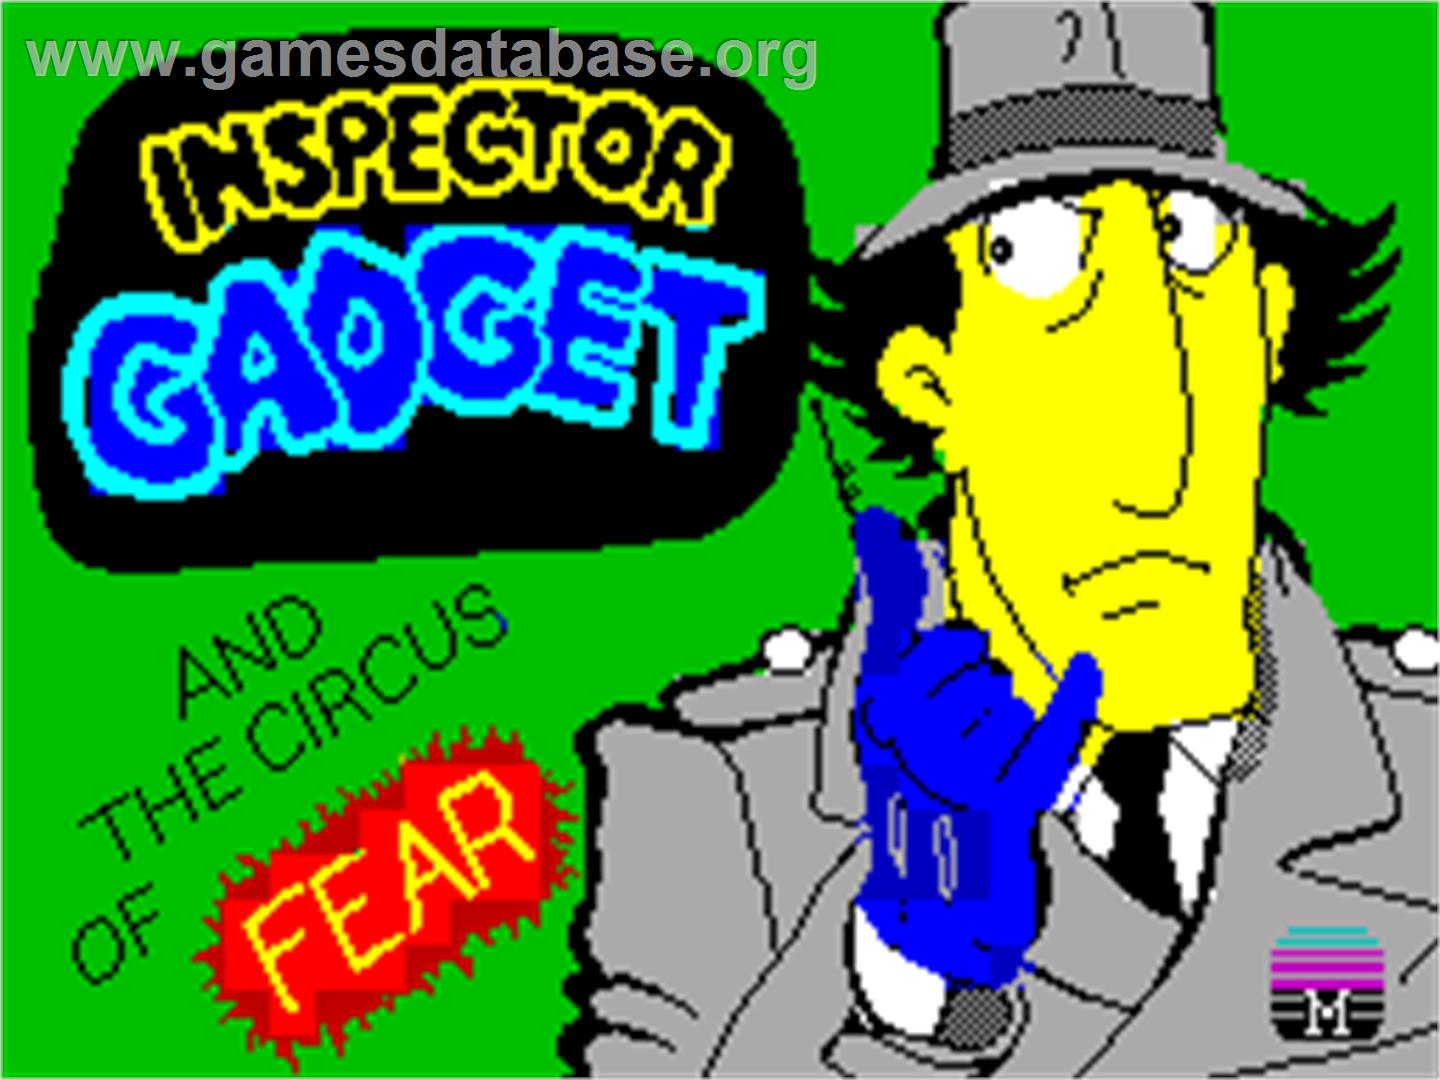 Inspector Gadget and the Circus of Fear - Sinclair ZX Spectrum - Artwork - Title Screen